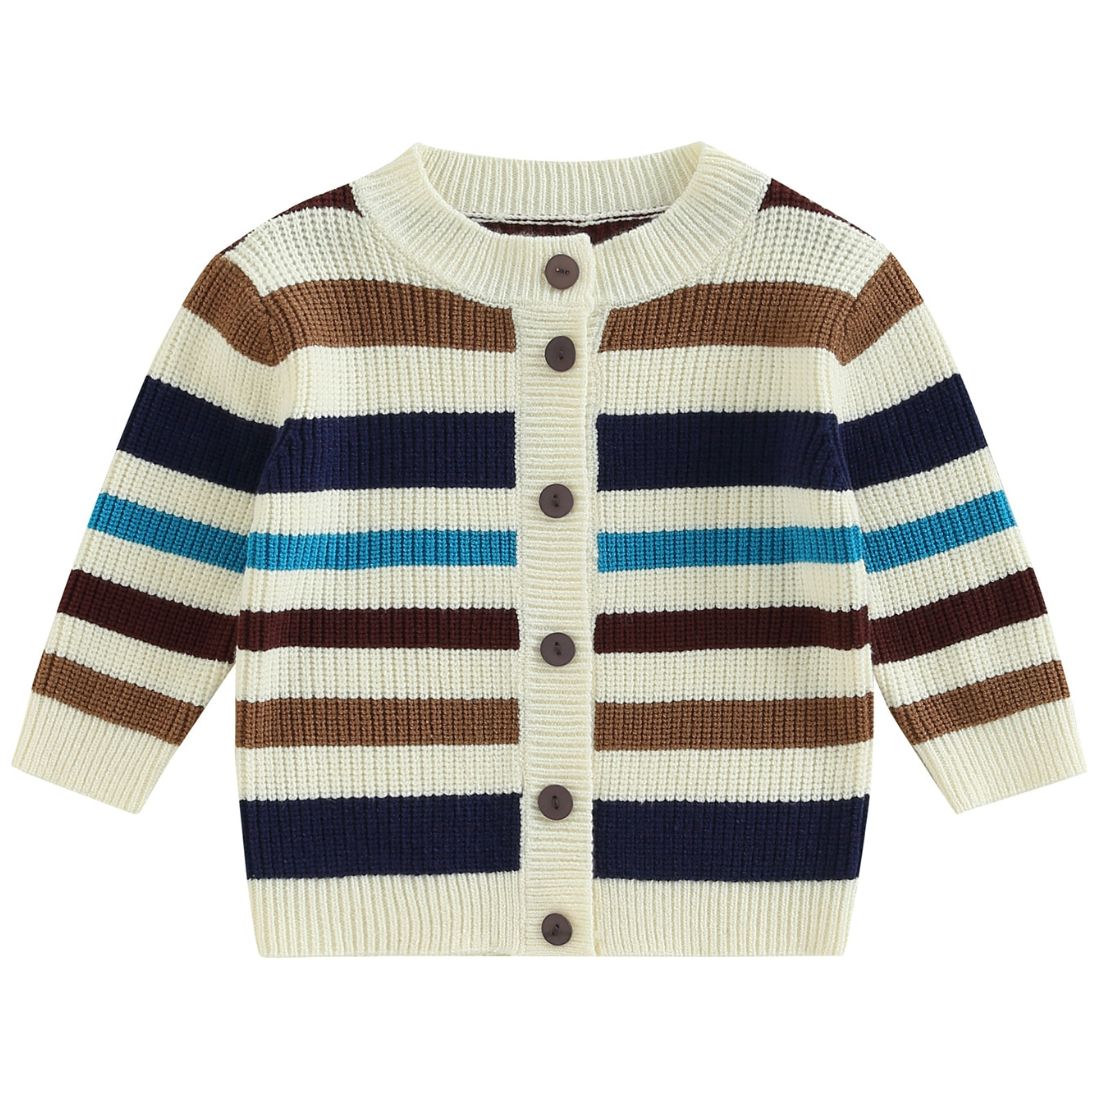 Blue and Brown Striped Knit Toddler Cardigan